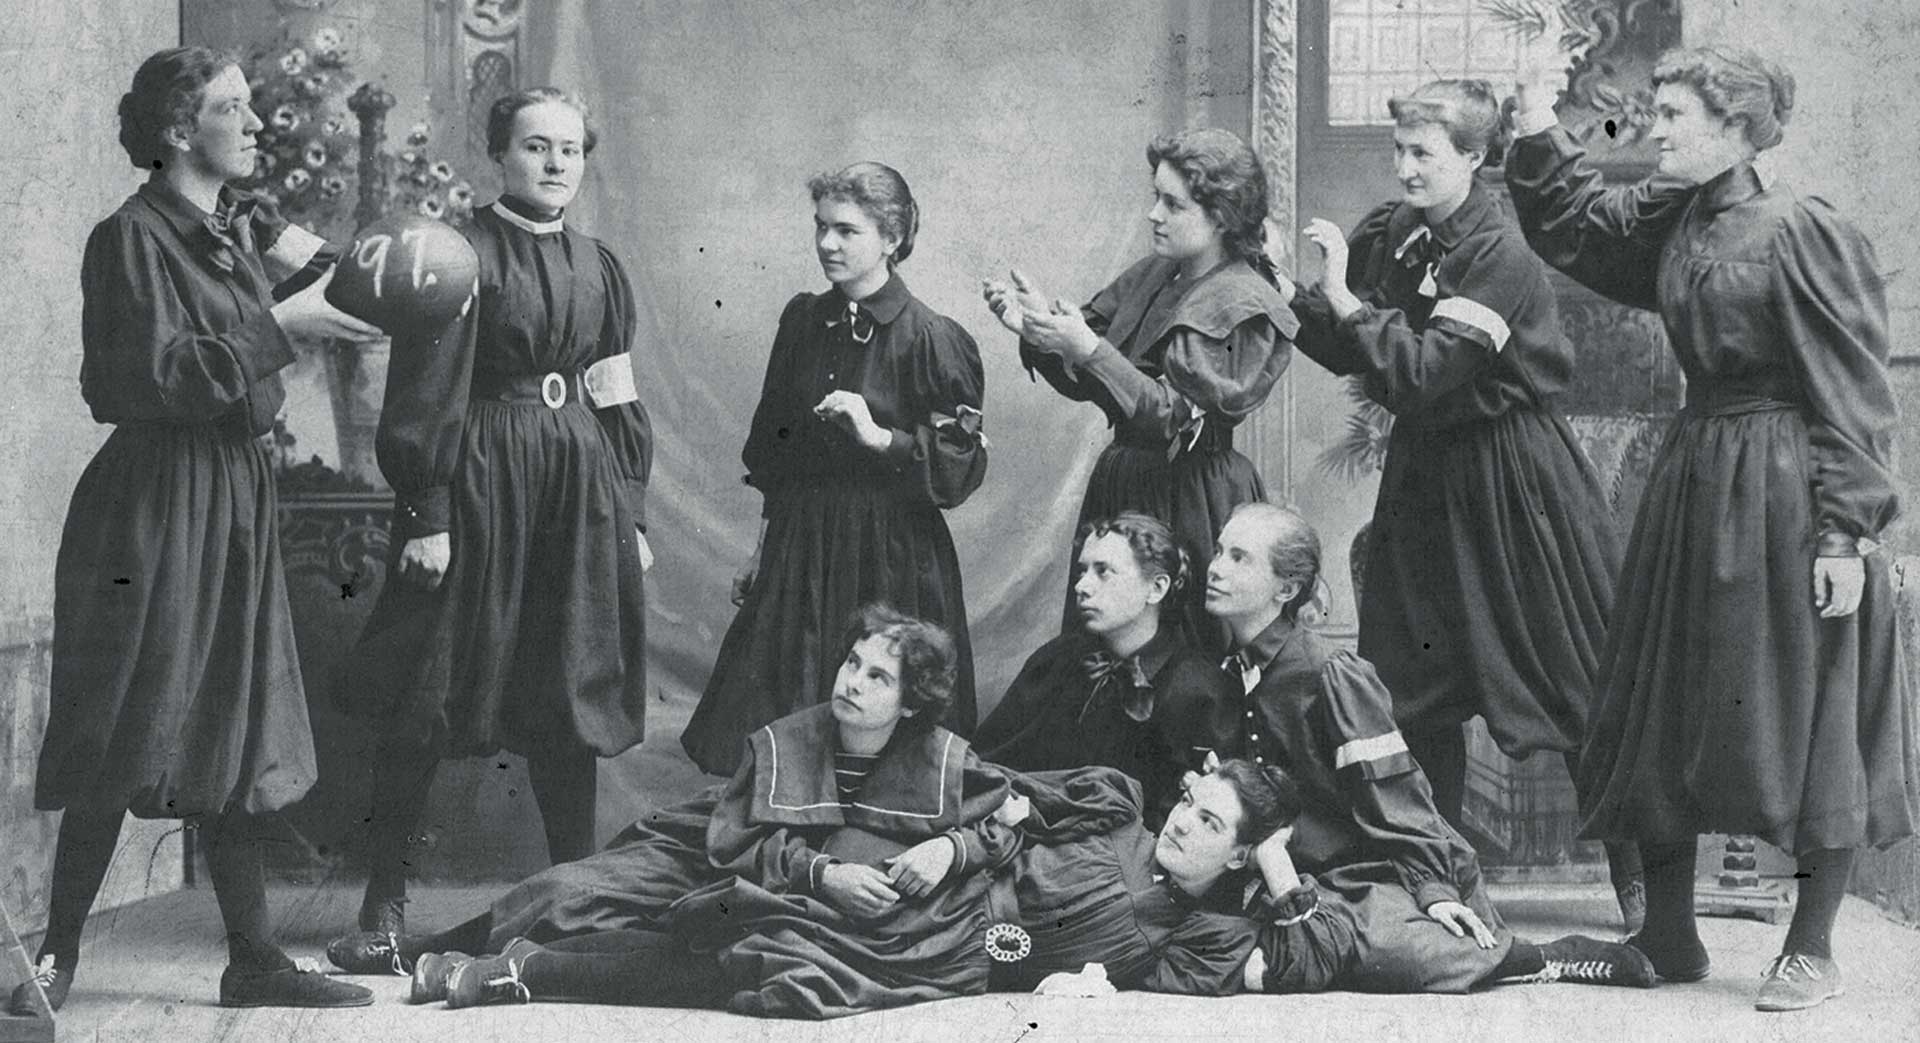 A Whitman woman's sports team from the 1800's.